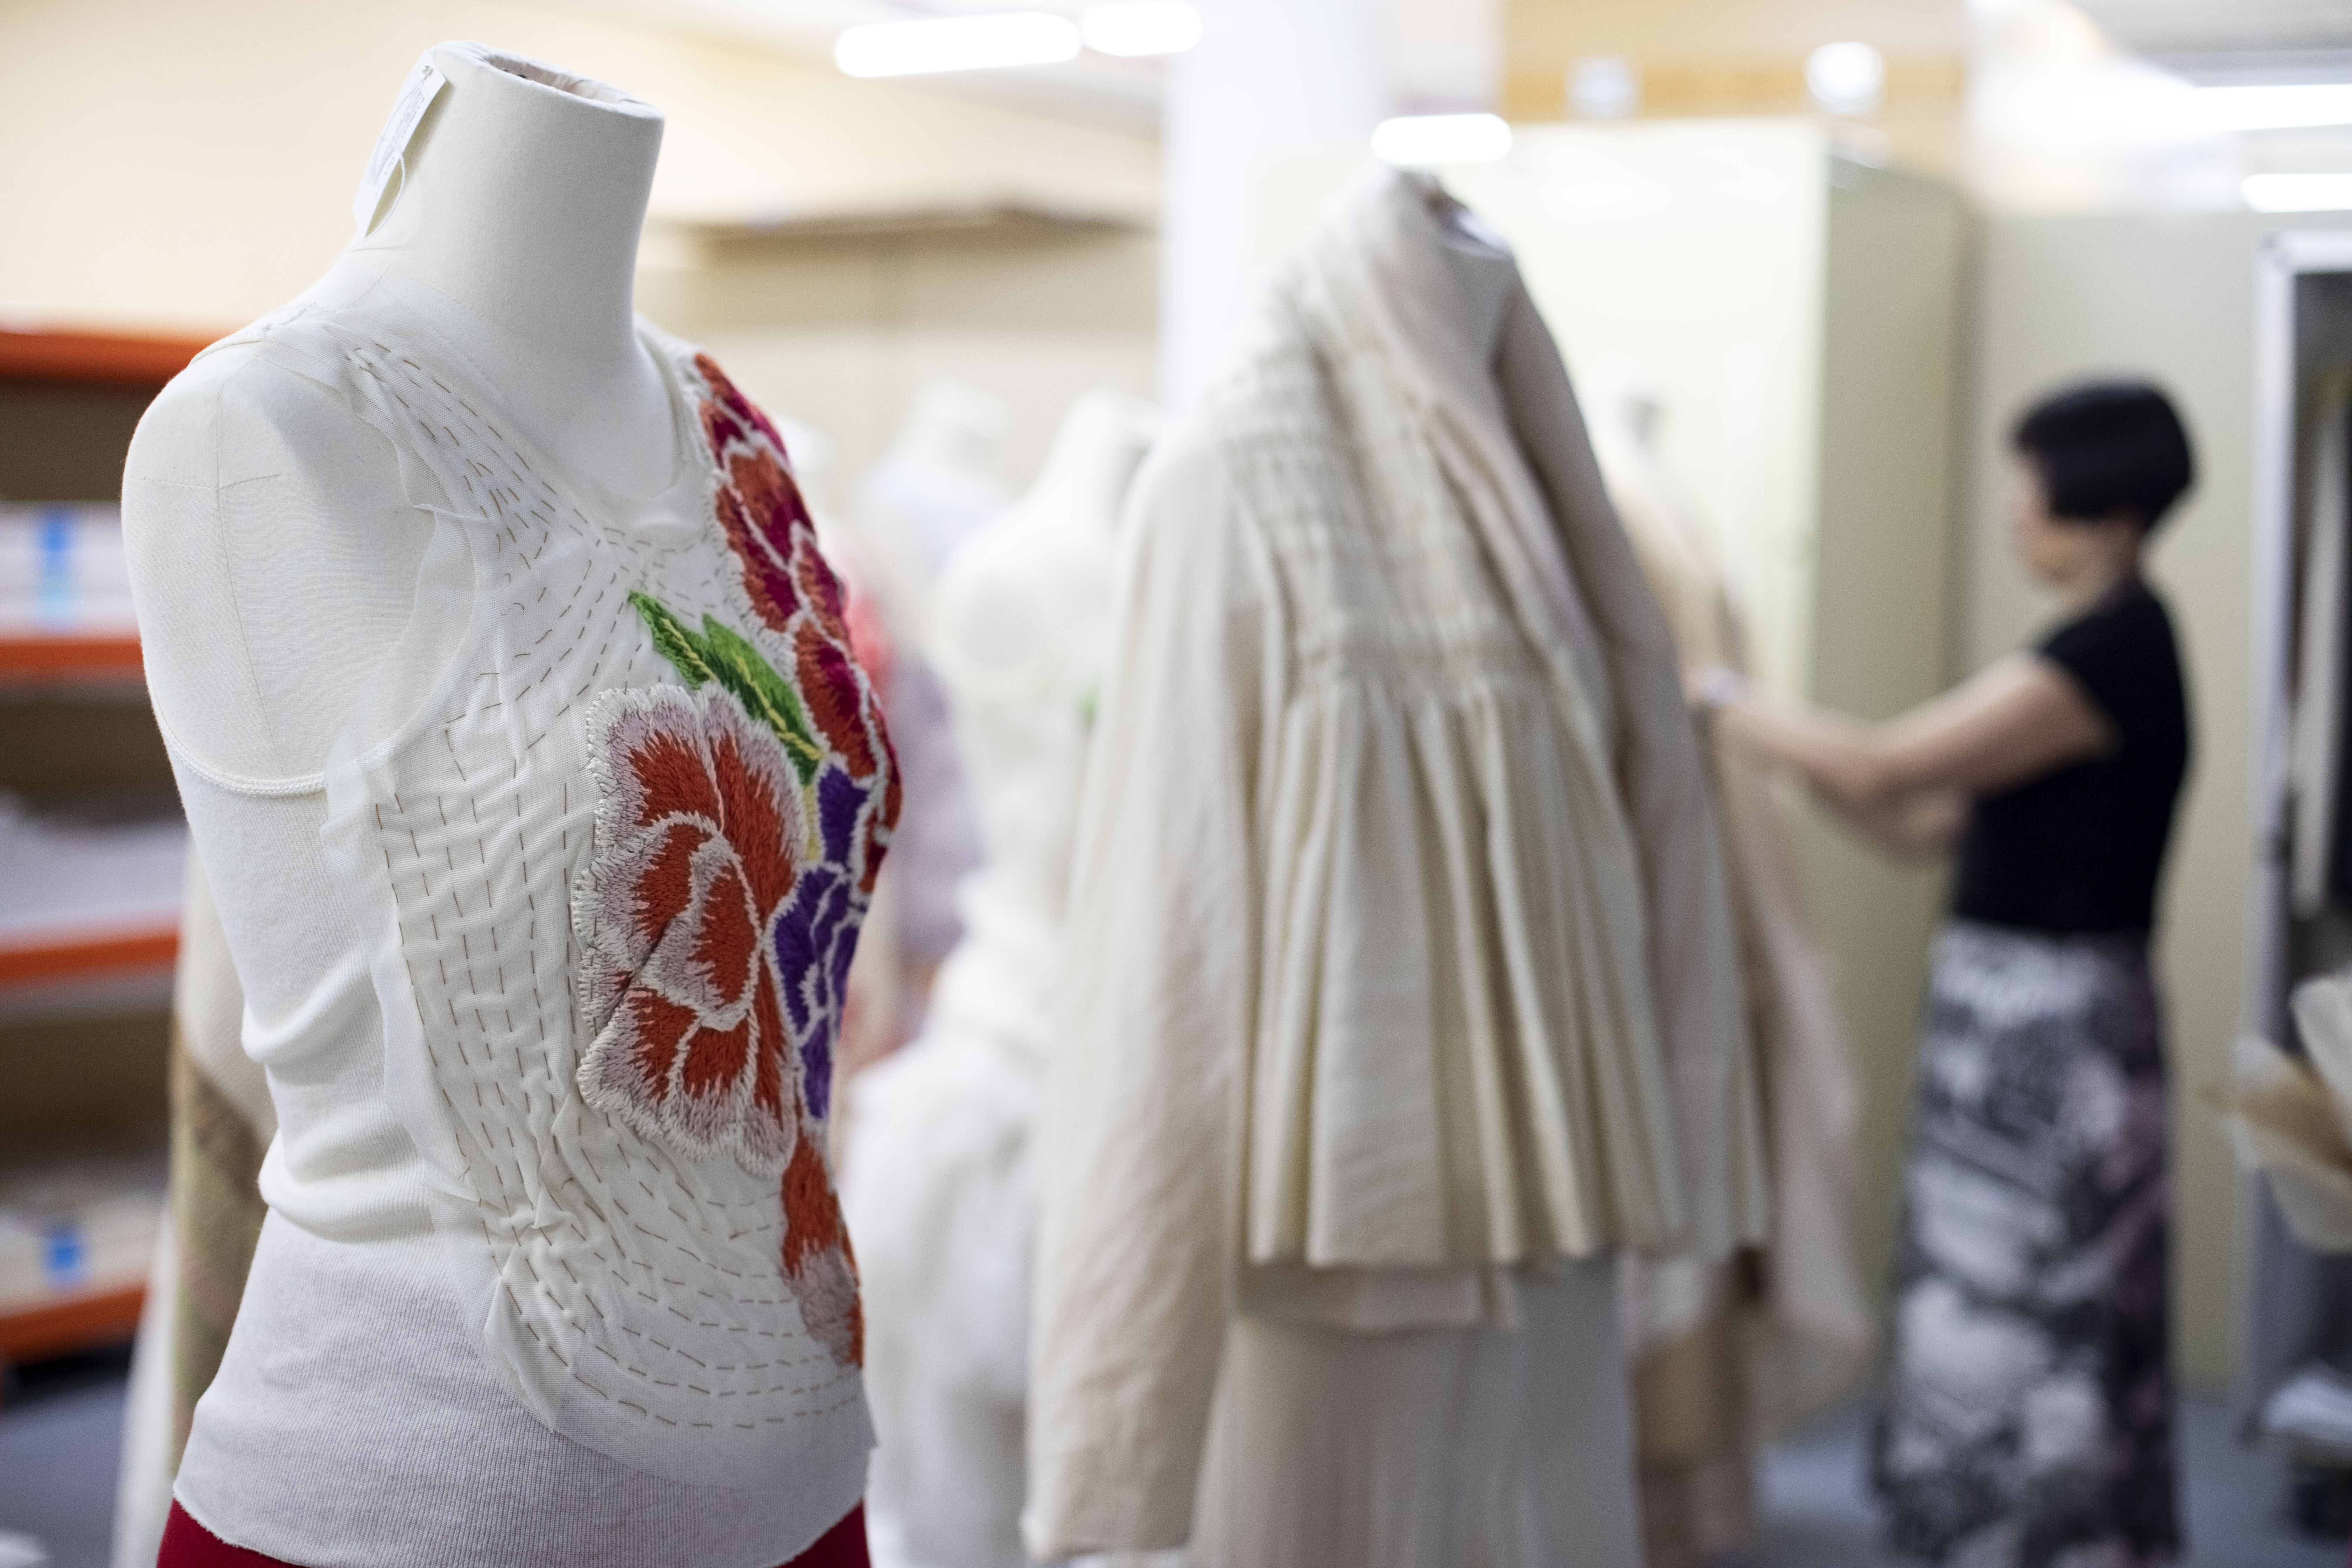 A white sleeveless top with floral applique pattern on a mannequin. In the background, out of focus, are a second dressed mannequin, and beyond that, a woman dressing a third mannequin.